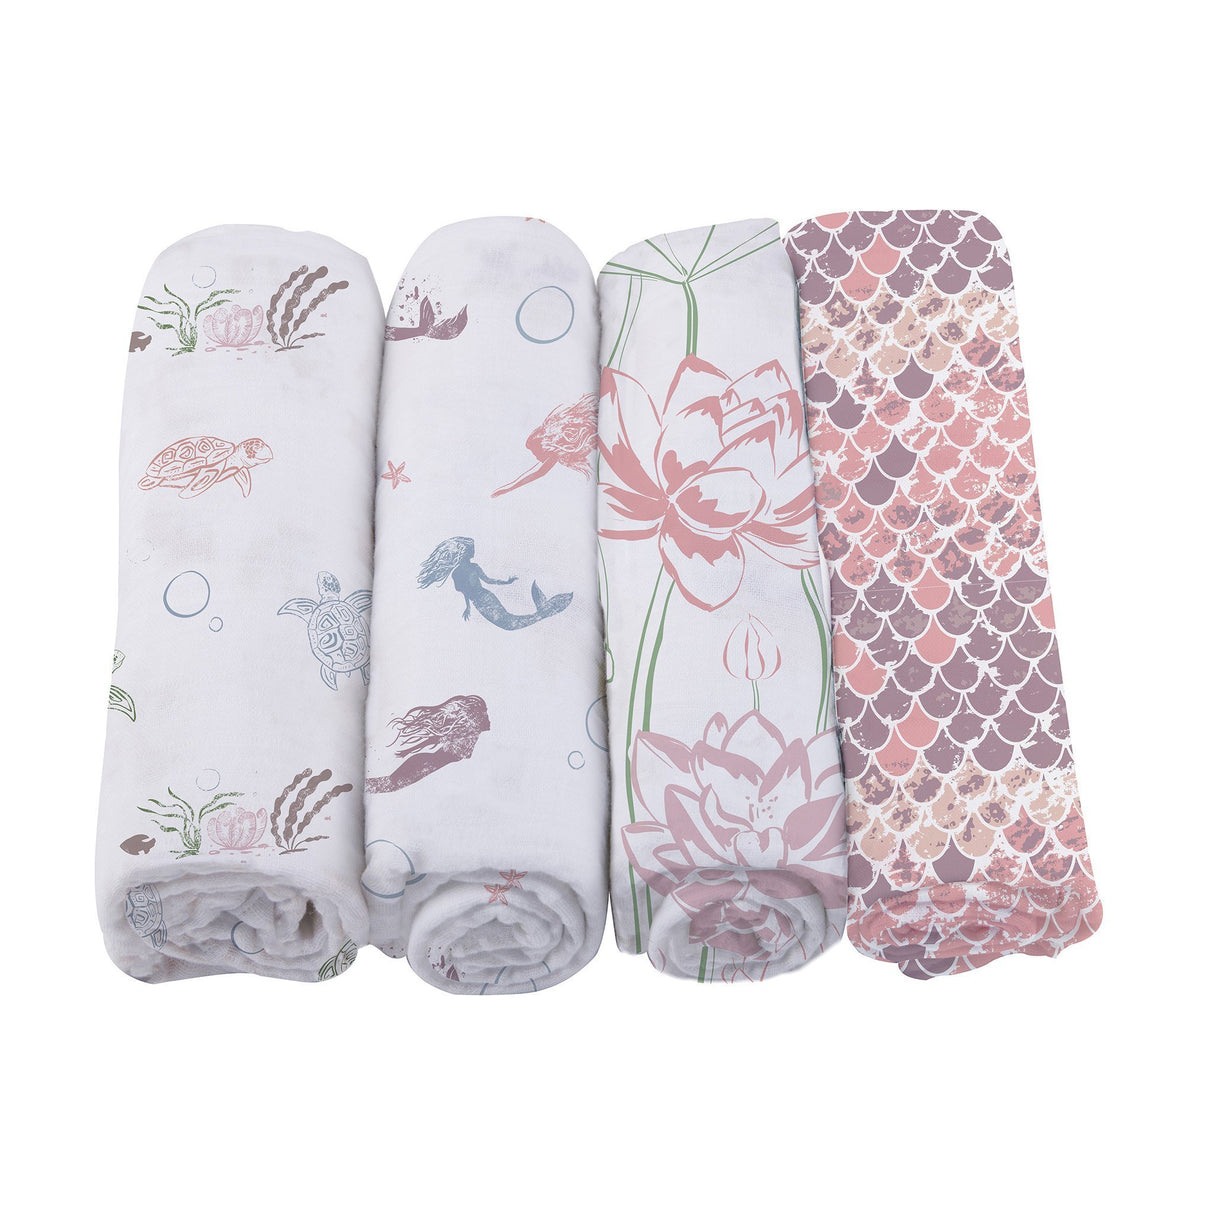 Under The Sea Swaddle Blankets 4 Pack - Aiden's Corner Baby & Toddler Clothes, Toys, Teethers, Feeding and Accesories